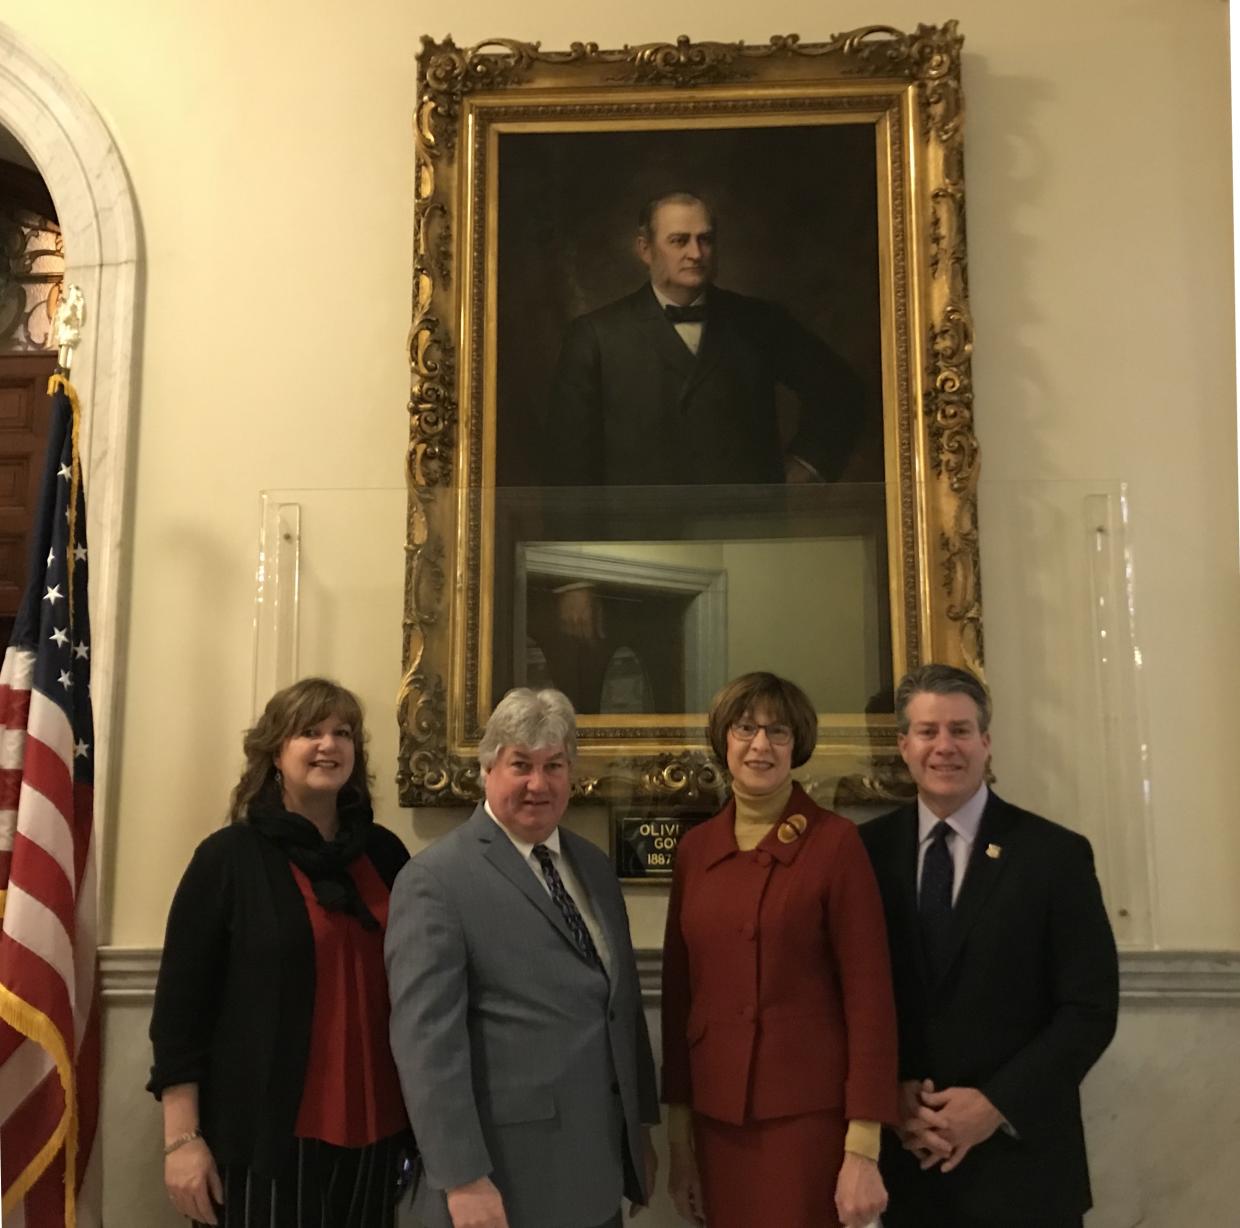 State Auditor Suzanne M. Bump unveiled a portrait of former Massachusetts Governor and former Easton resident, Oliver Ames. From left: Dottie Fulginiti of the Easton Select Board; Sen. Michael D. Brady; Auditor Bump; and Sen. Walter F. Timilty.